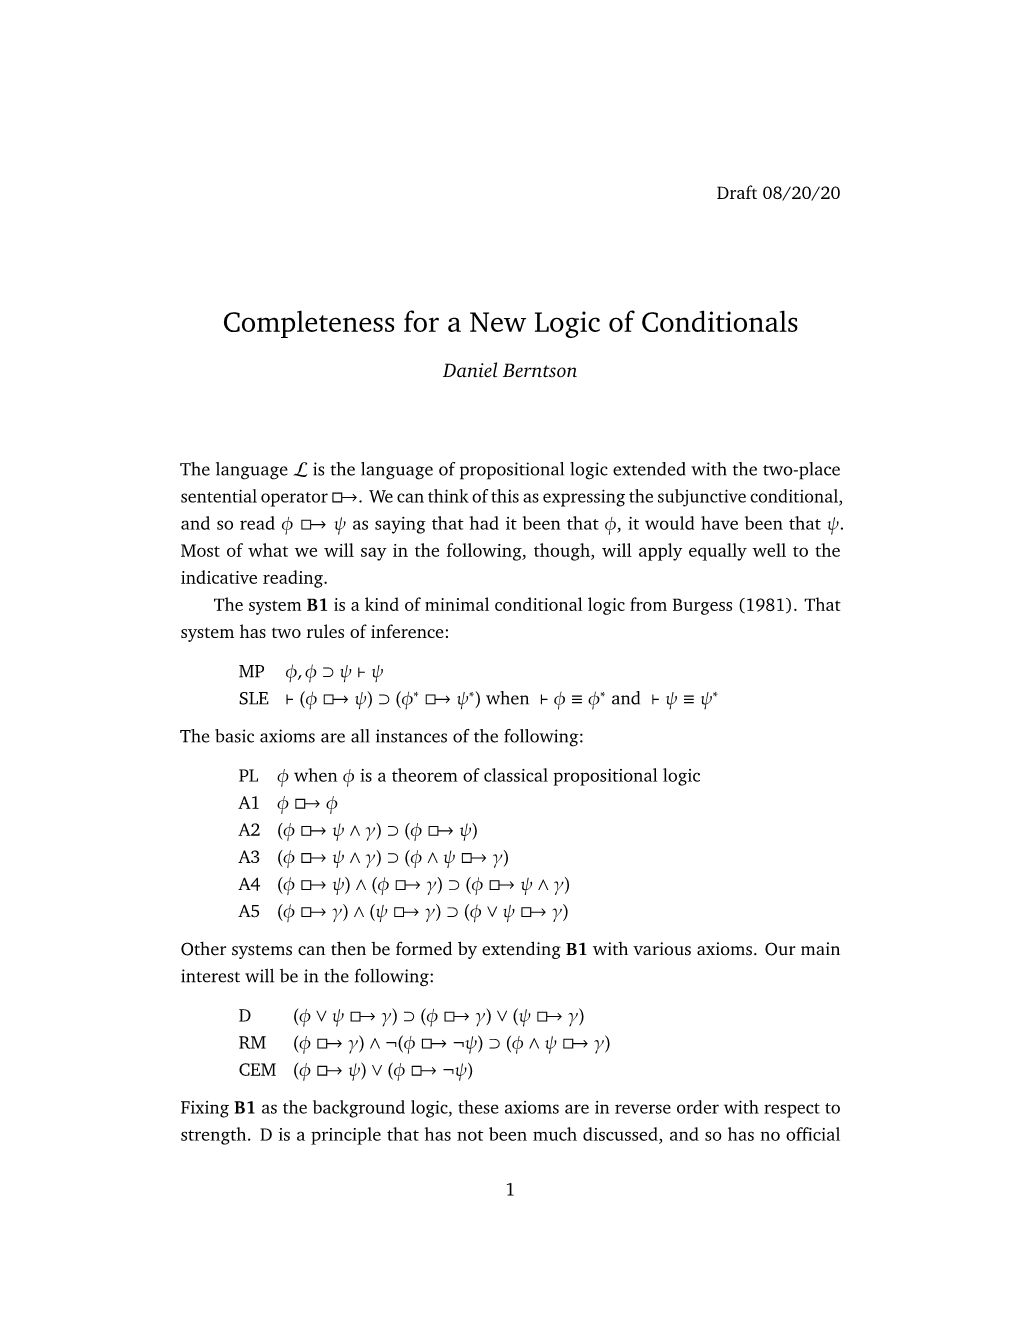 Completeness for a New Logic of Conditionals